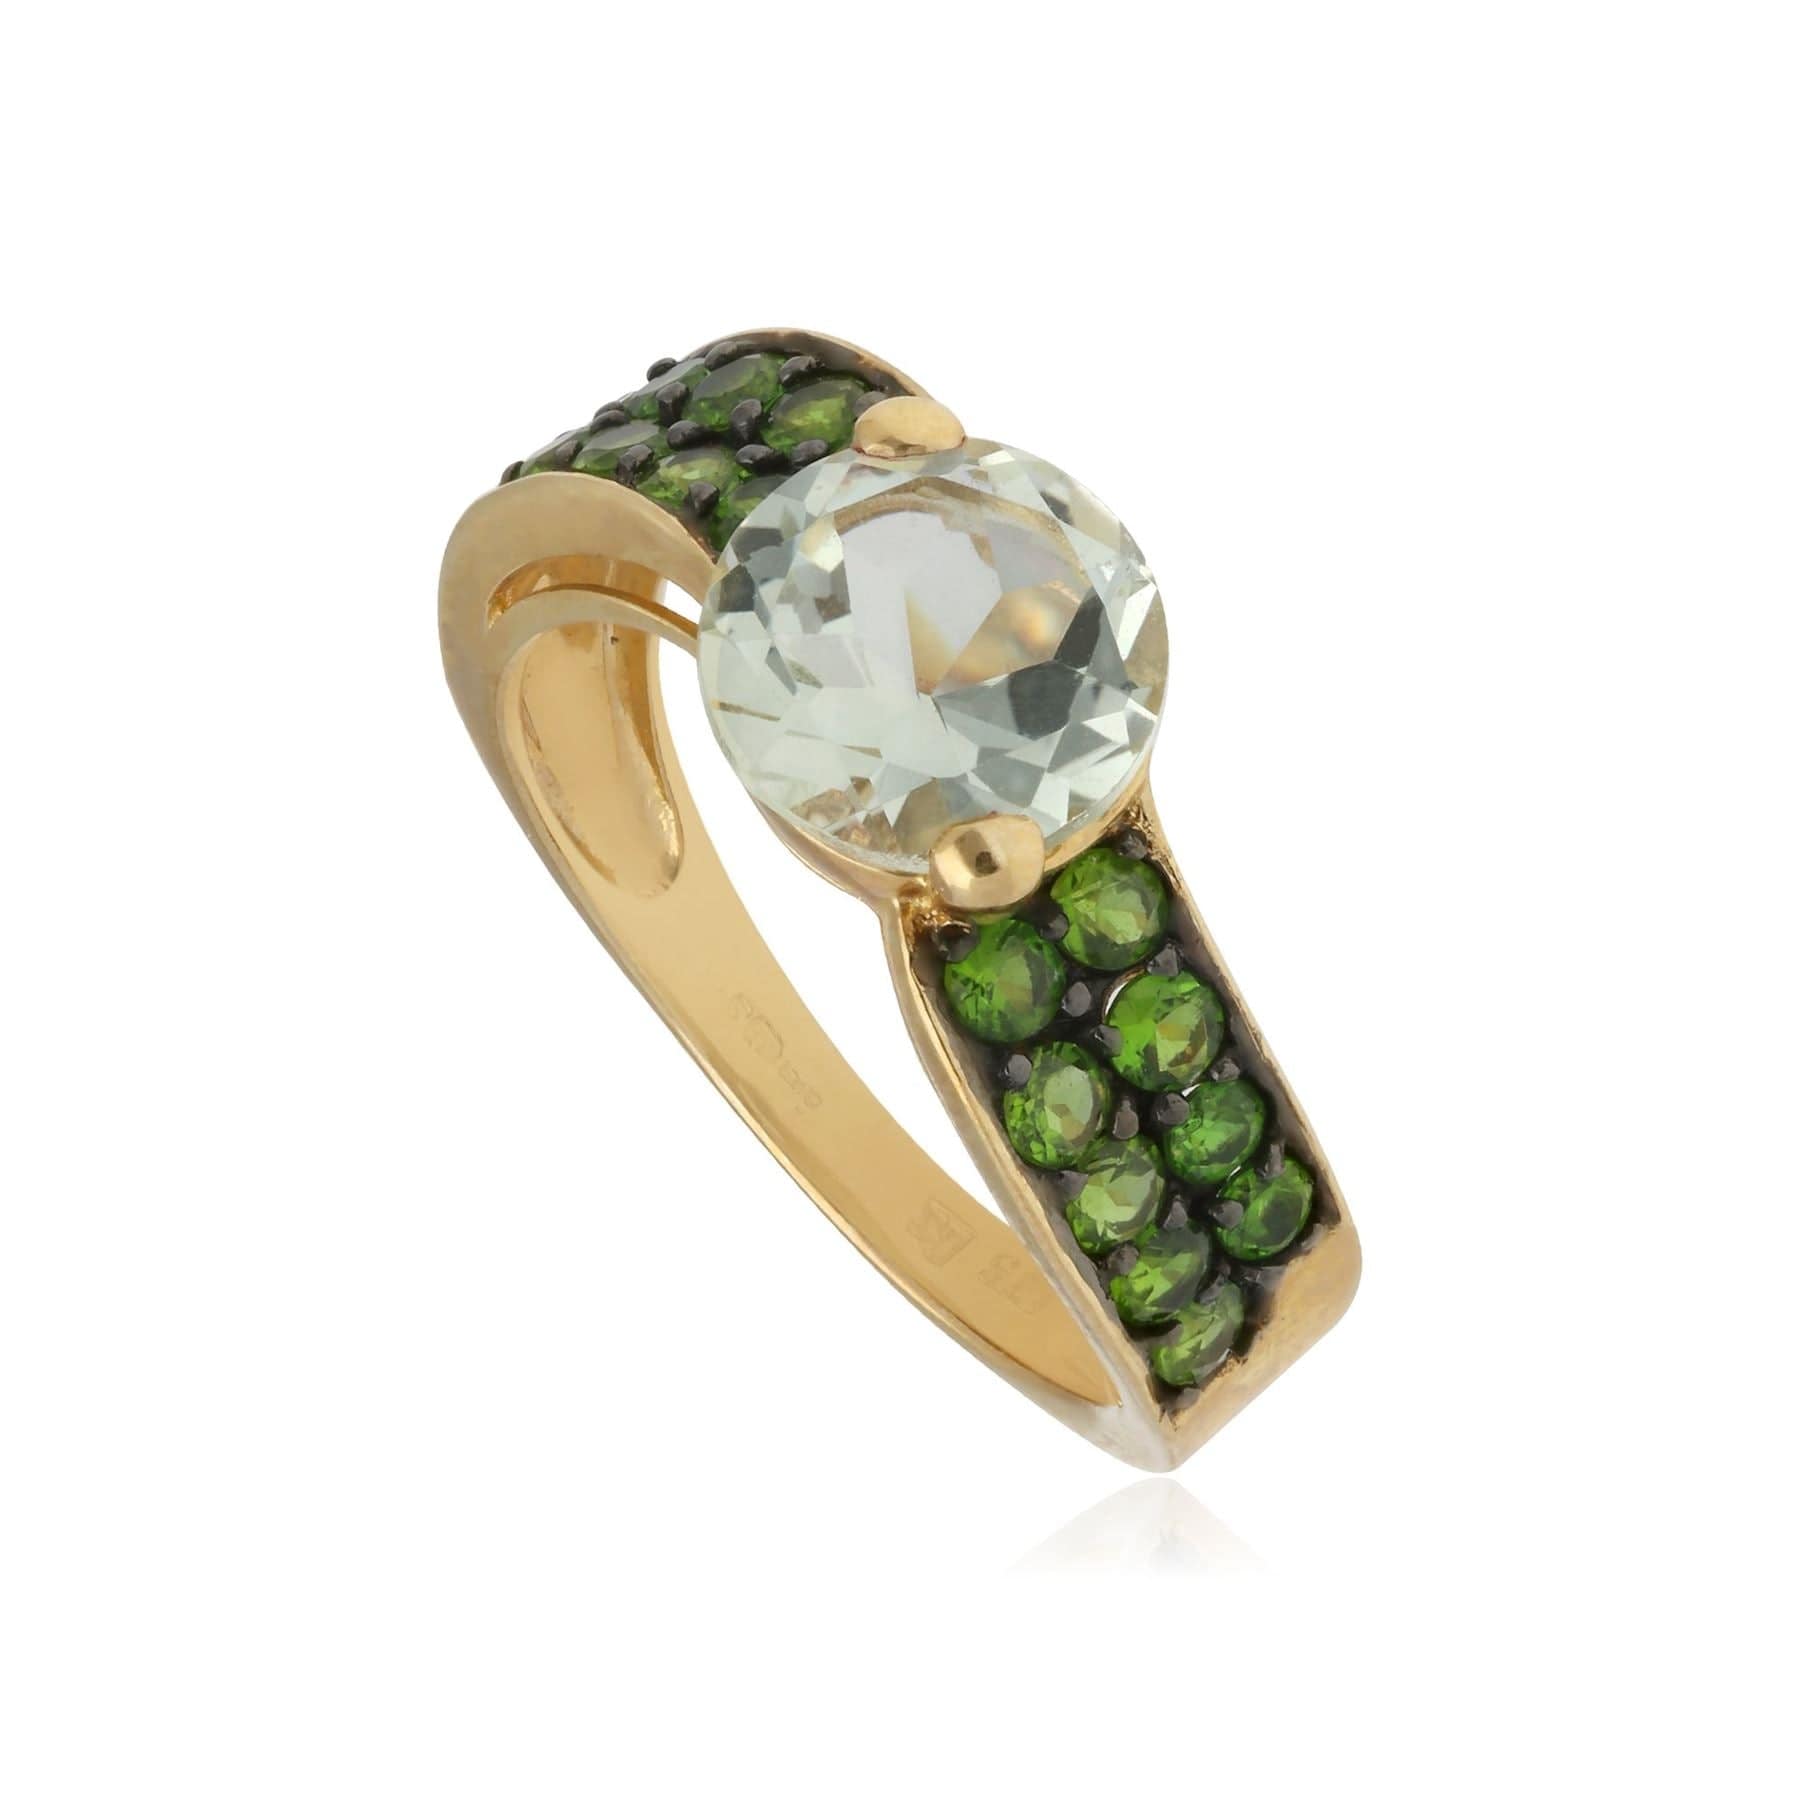 T0086R40S019 Kosmos Chrome Diopside & Moonstone Cocktail Ring in 9ct Yellow Gold 1